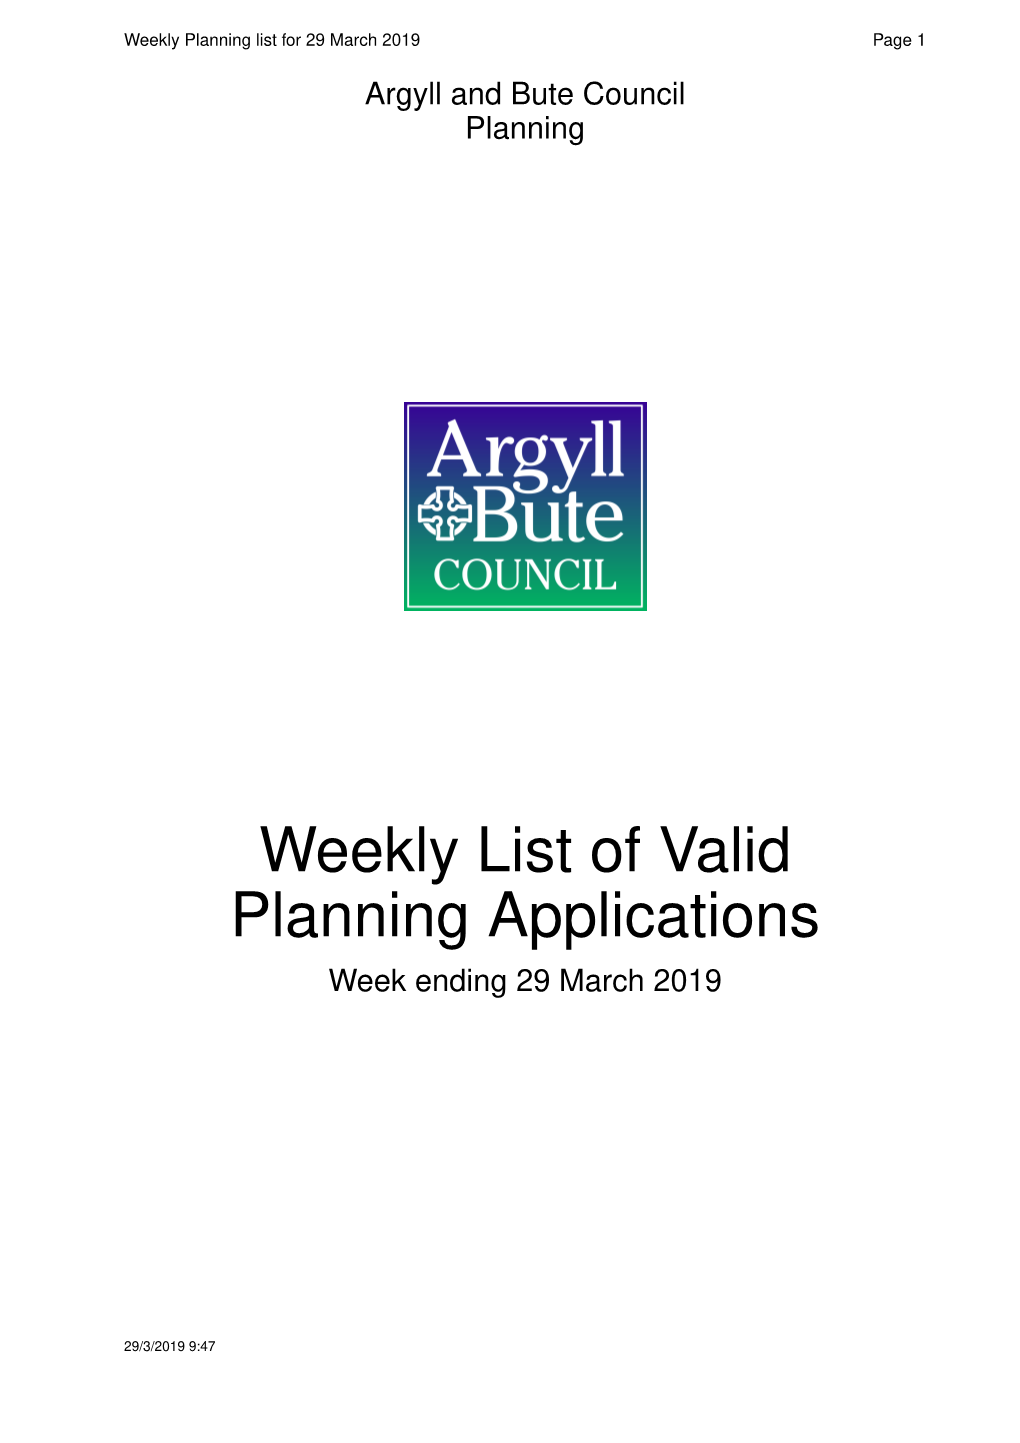 Weekly List of Valid Planning Applications 29Th March 2019.Pdf